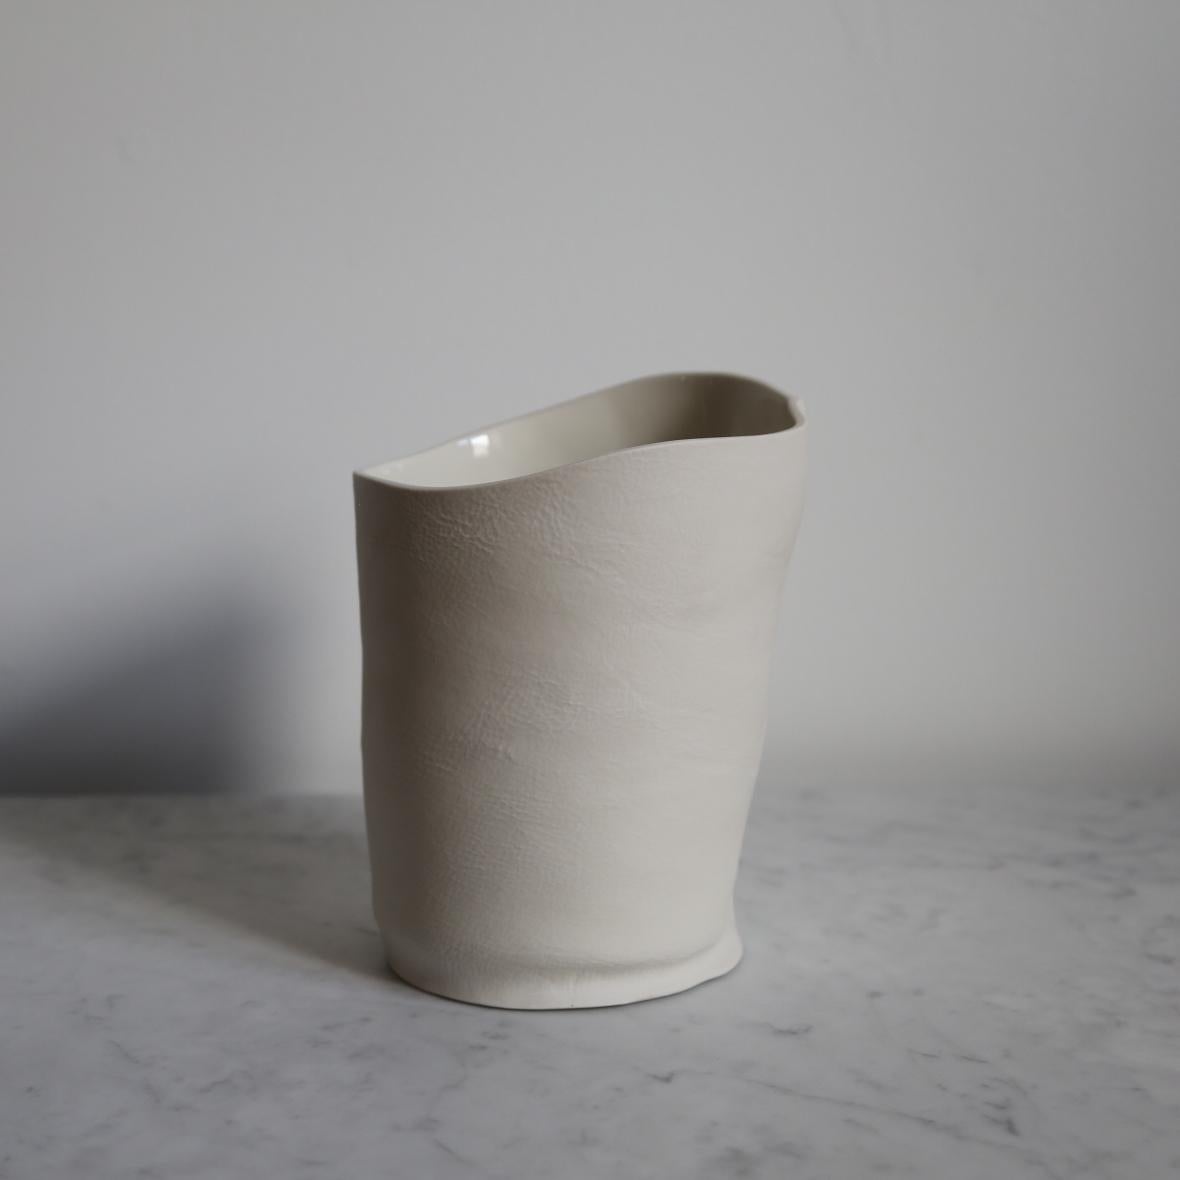 Modern Set of Three Unique Kawa Vases and Vessels, Porcelain, Ceramic, in Stock